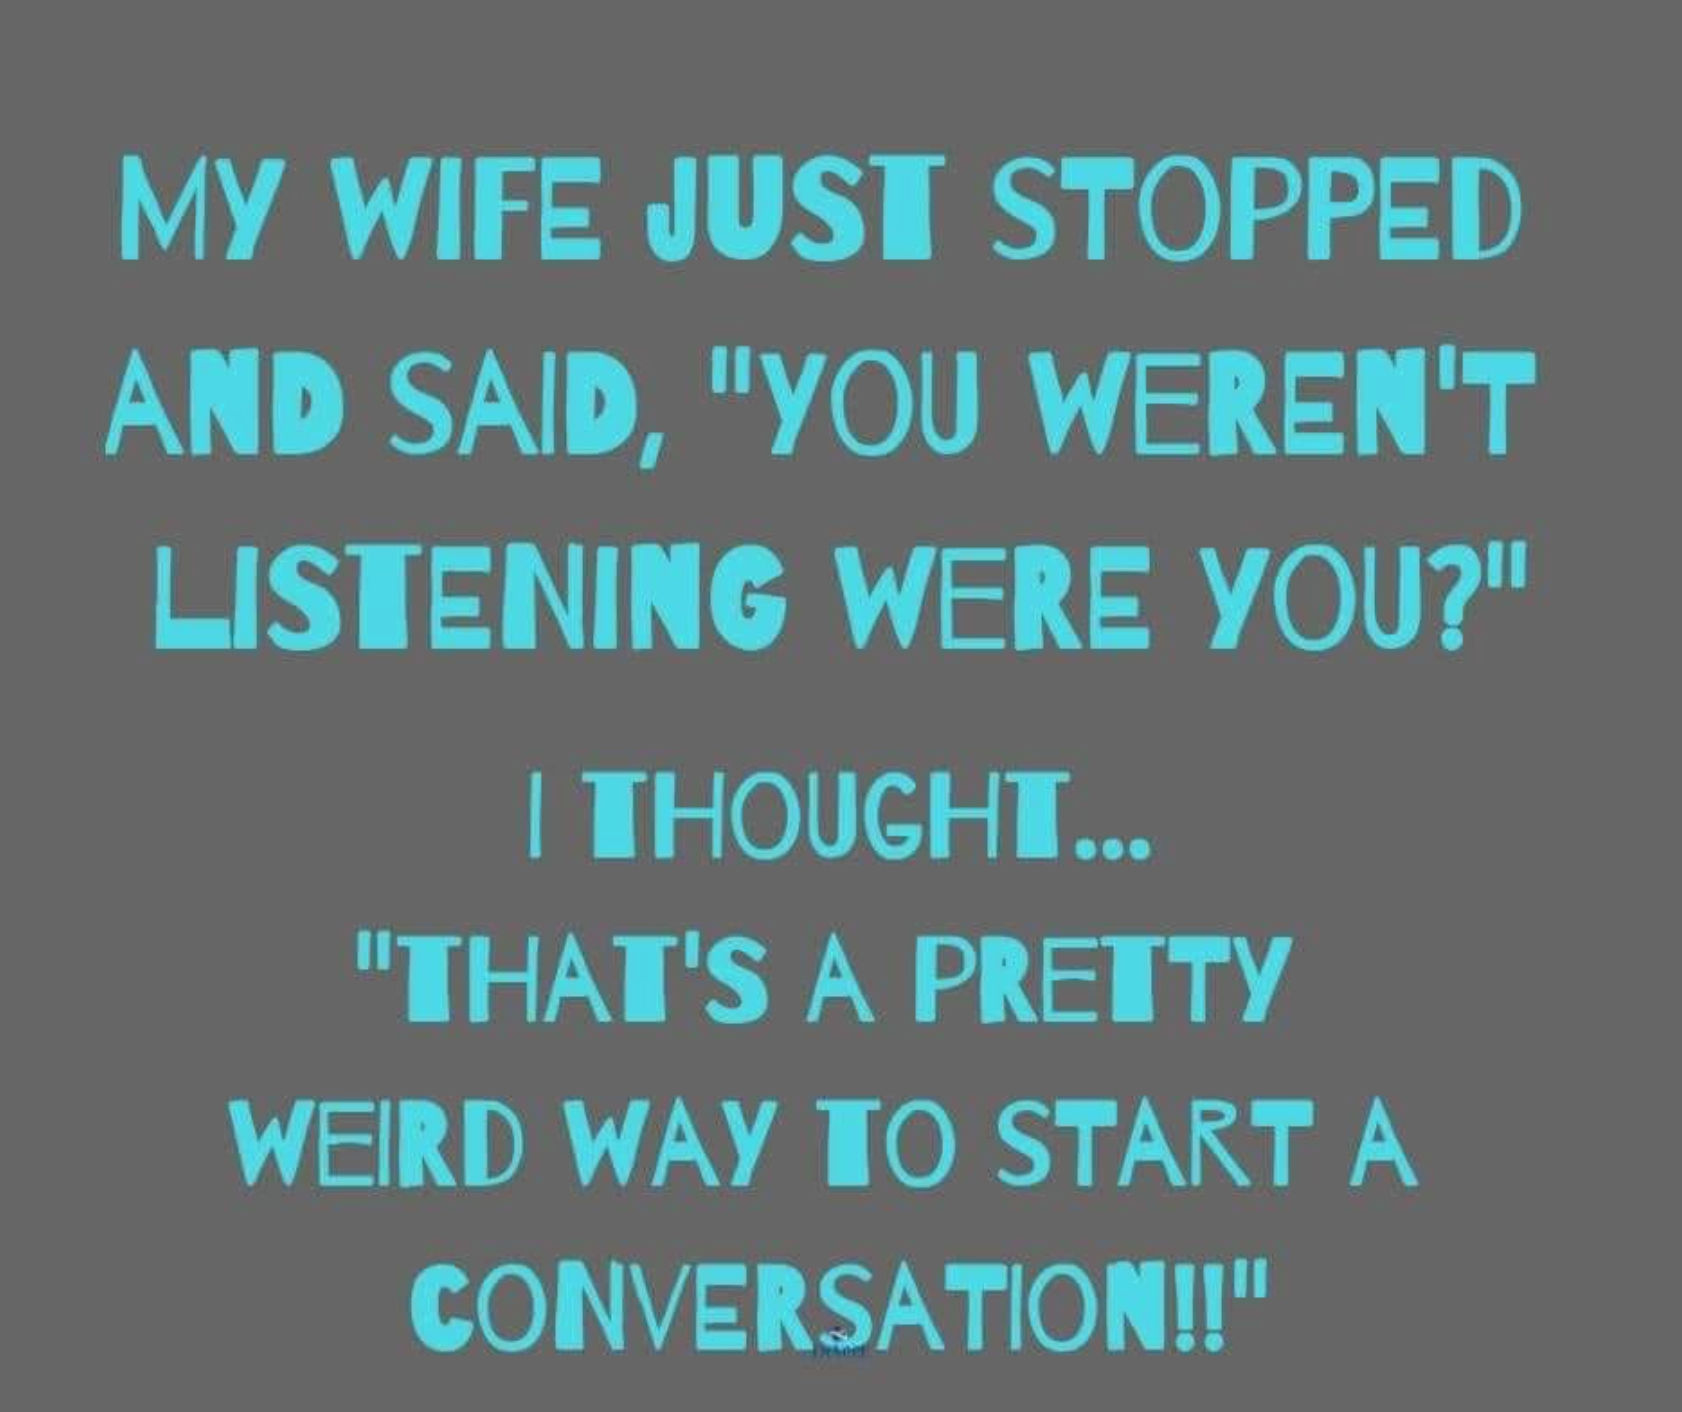 angle - My Wife Just Stopped And Said, "You Weren'T Listening Were You?" | Thought... "That'S A Pretty Weird Way To Start A Conversation!!"